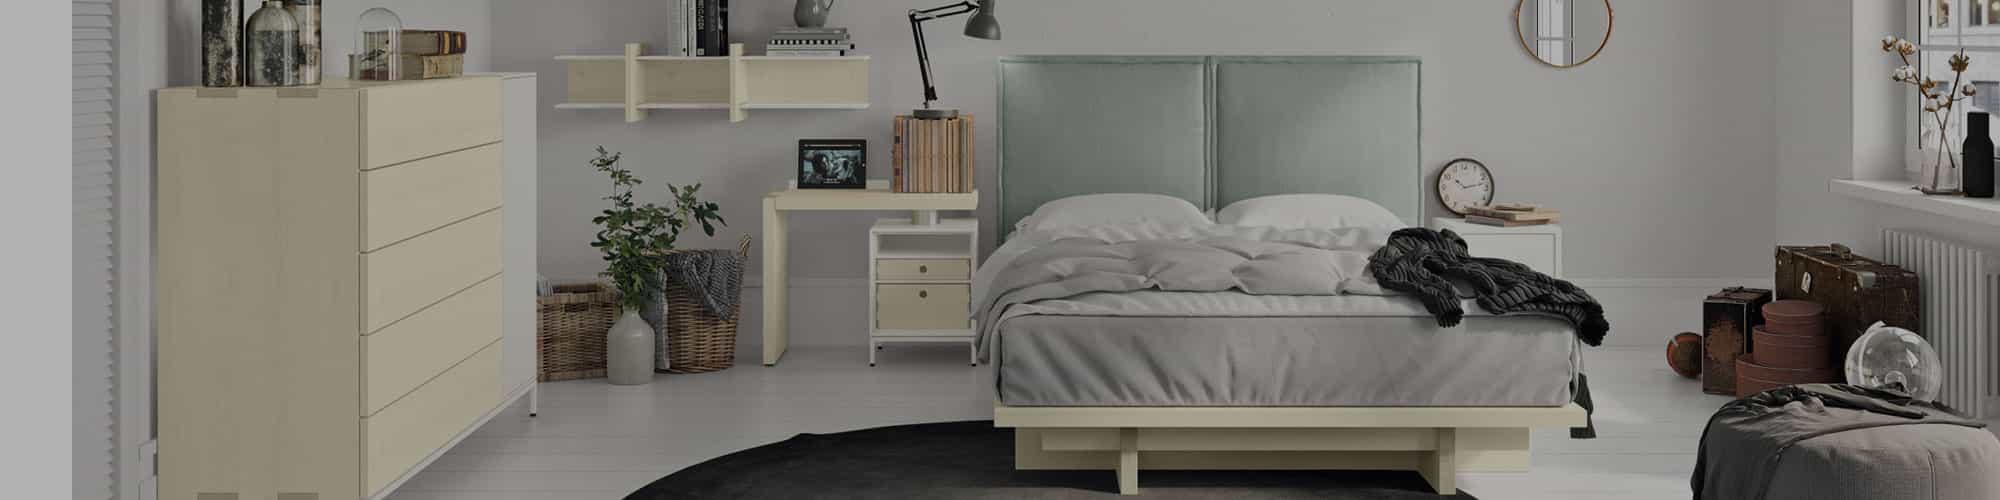 Advice On How To Buy A Bed by FCI London